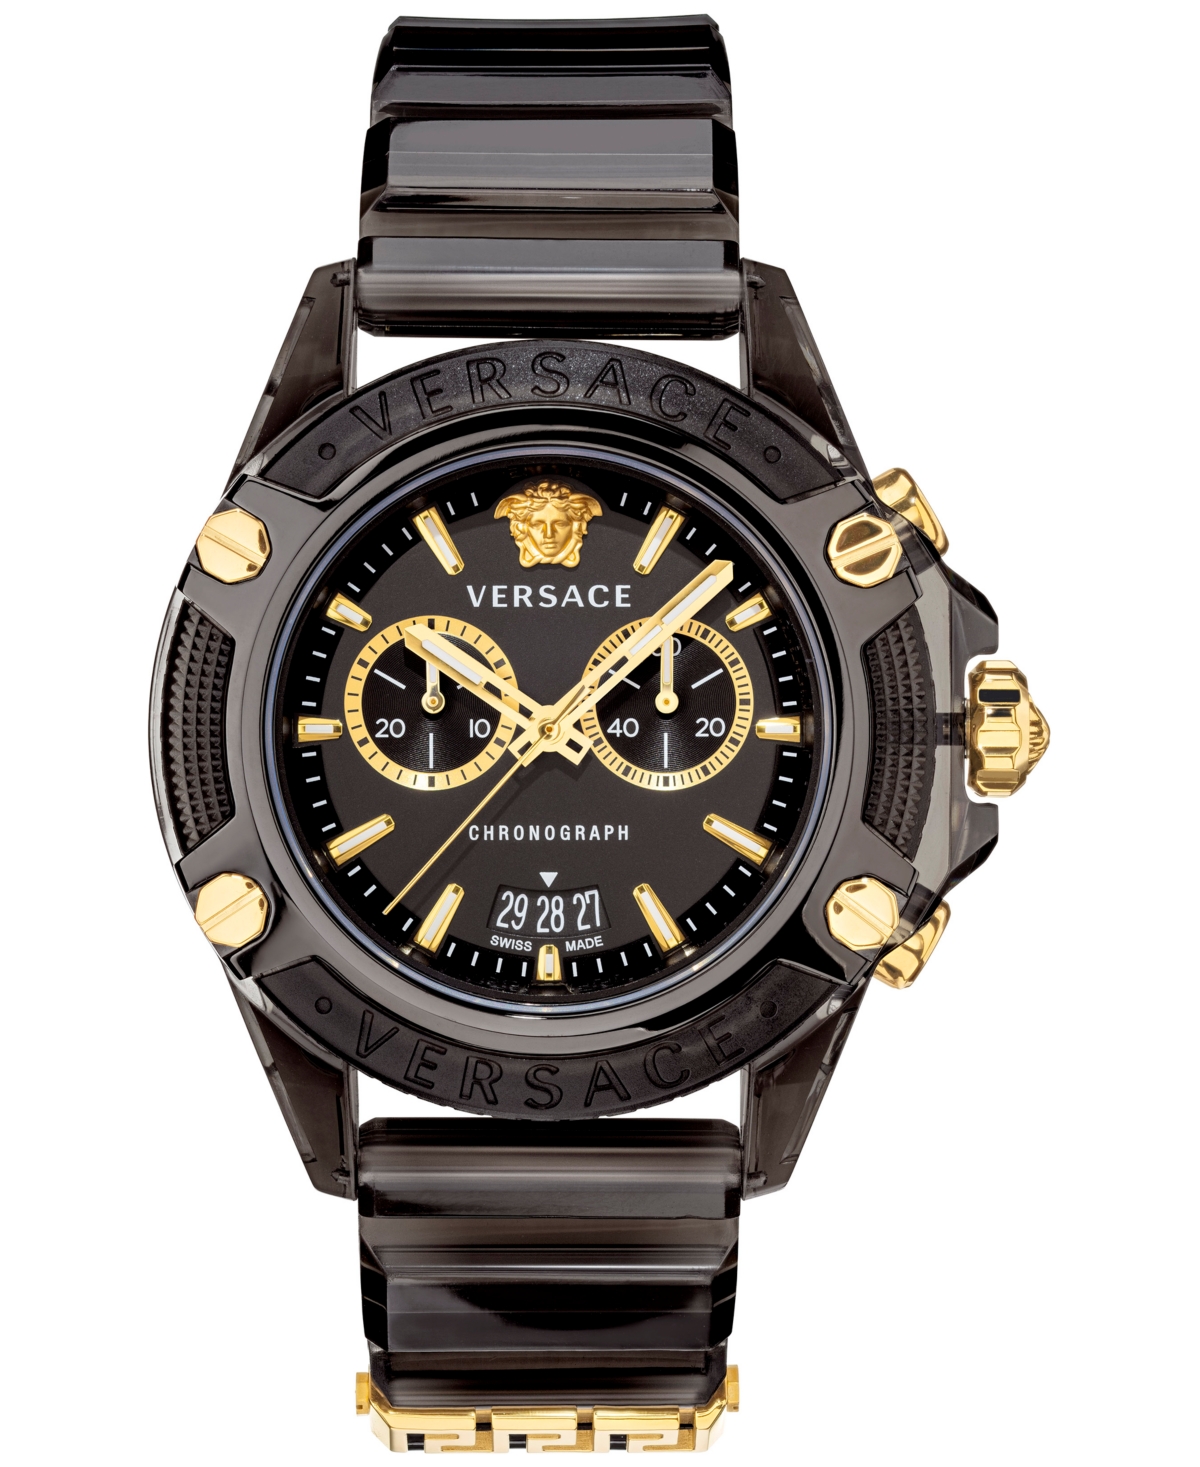 VERSACE MEN'S SWISS CHRONOGRAPH ICON ACTIVE BLACK SILICONE STRAP WATCH 44MM